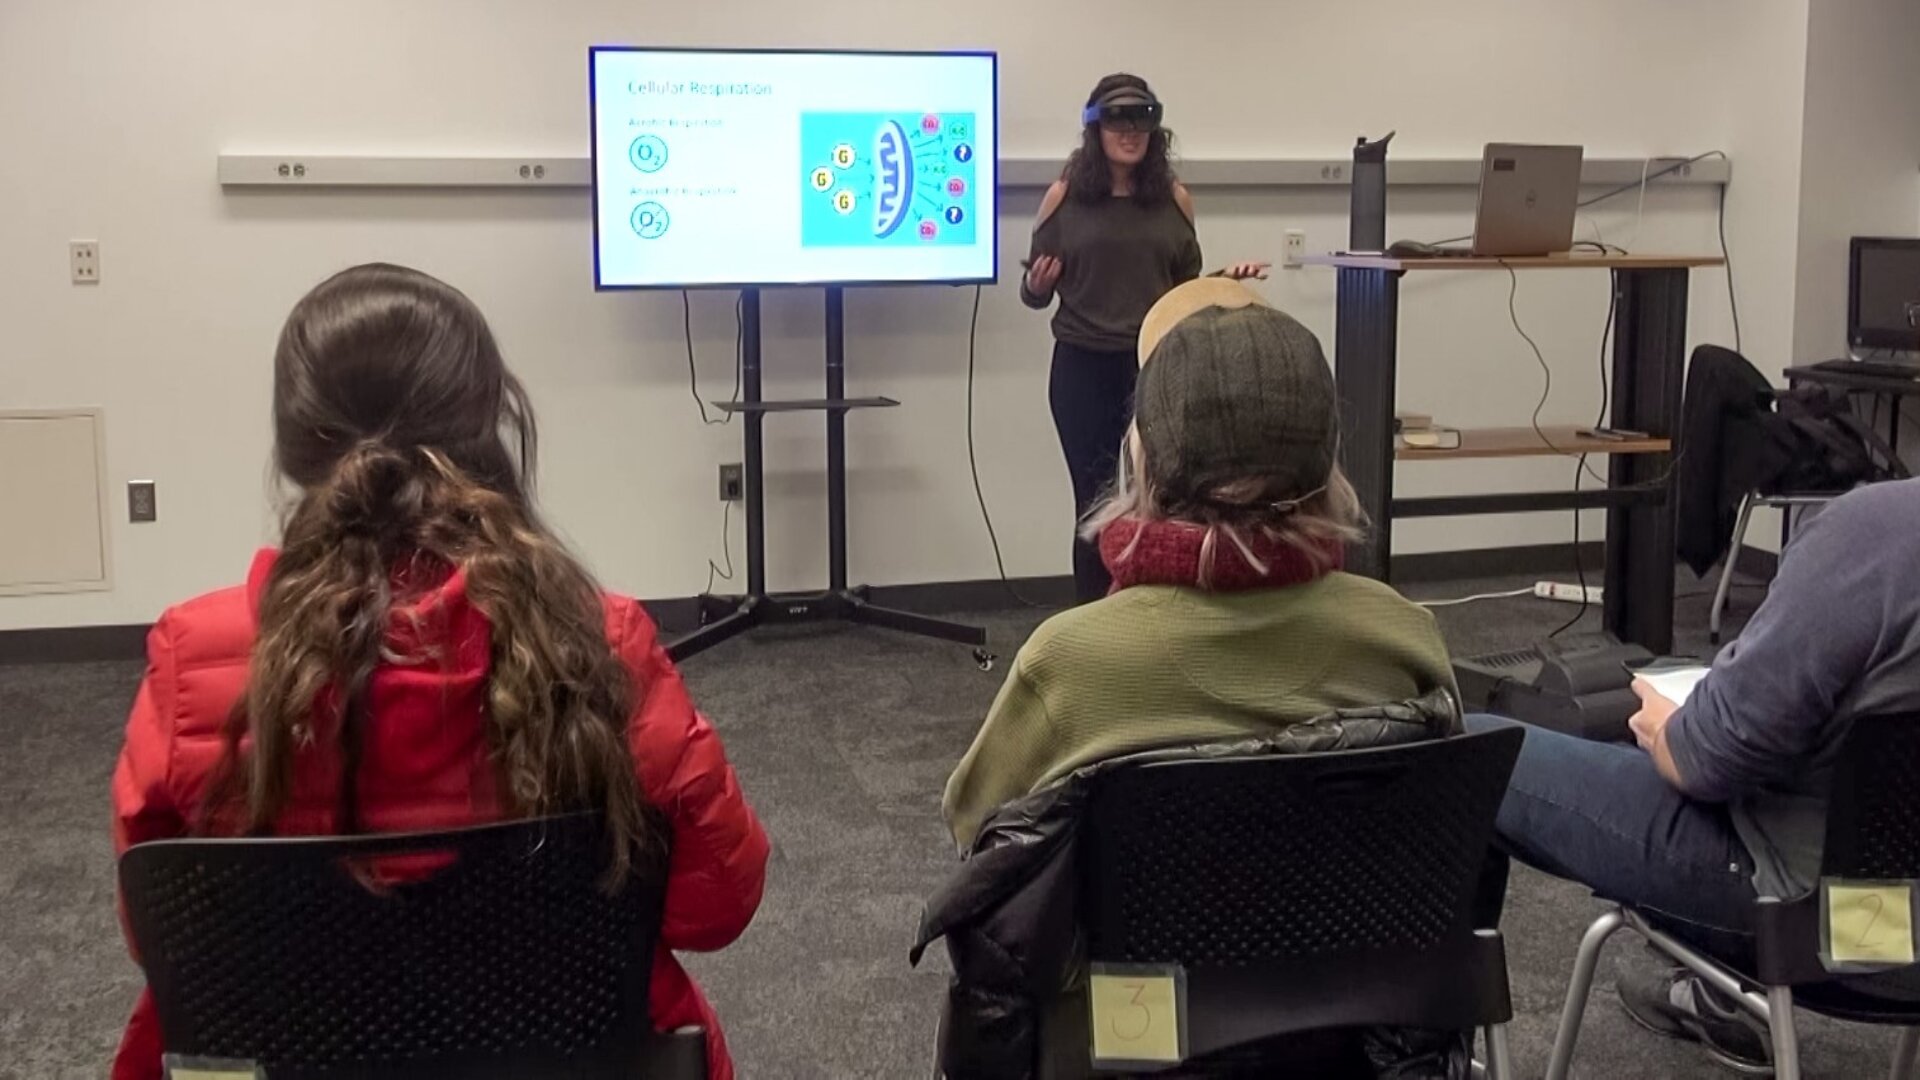 A presenter using the HoloLens AR presentation system during a presentation in front of an audience.